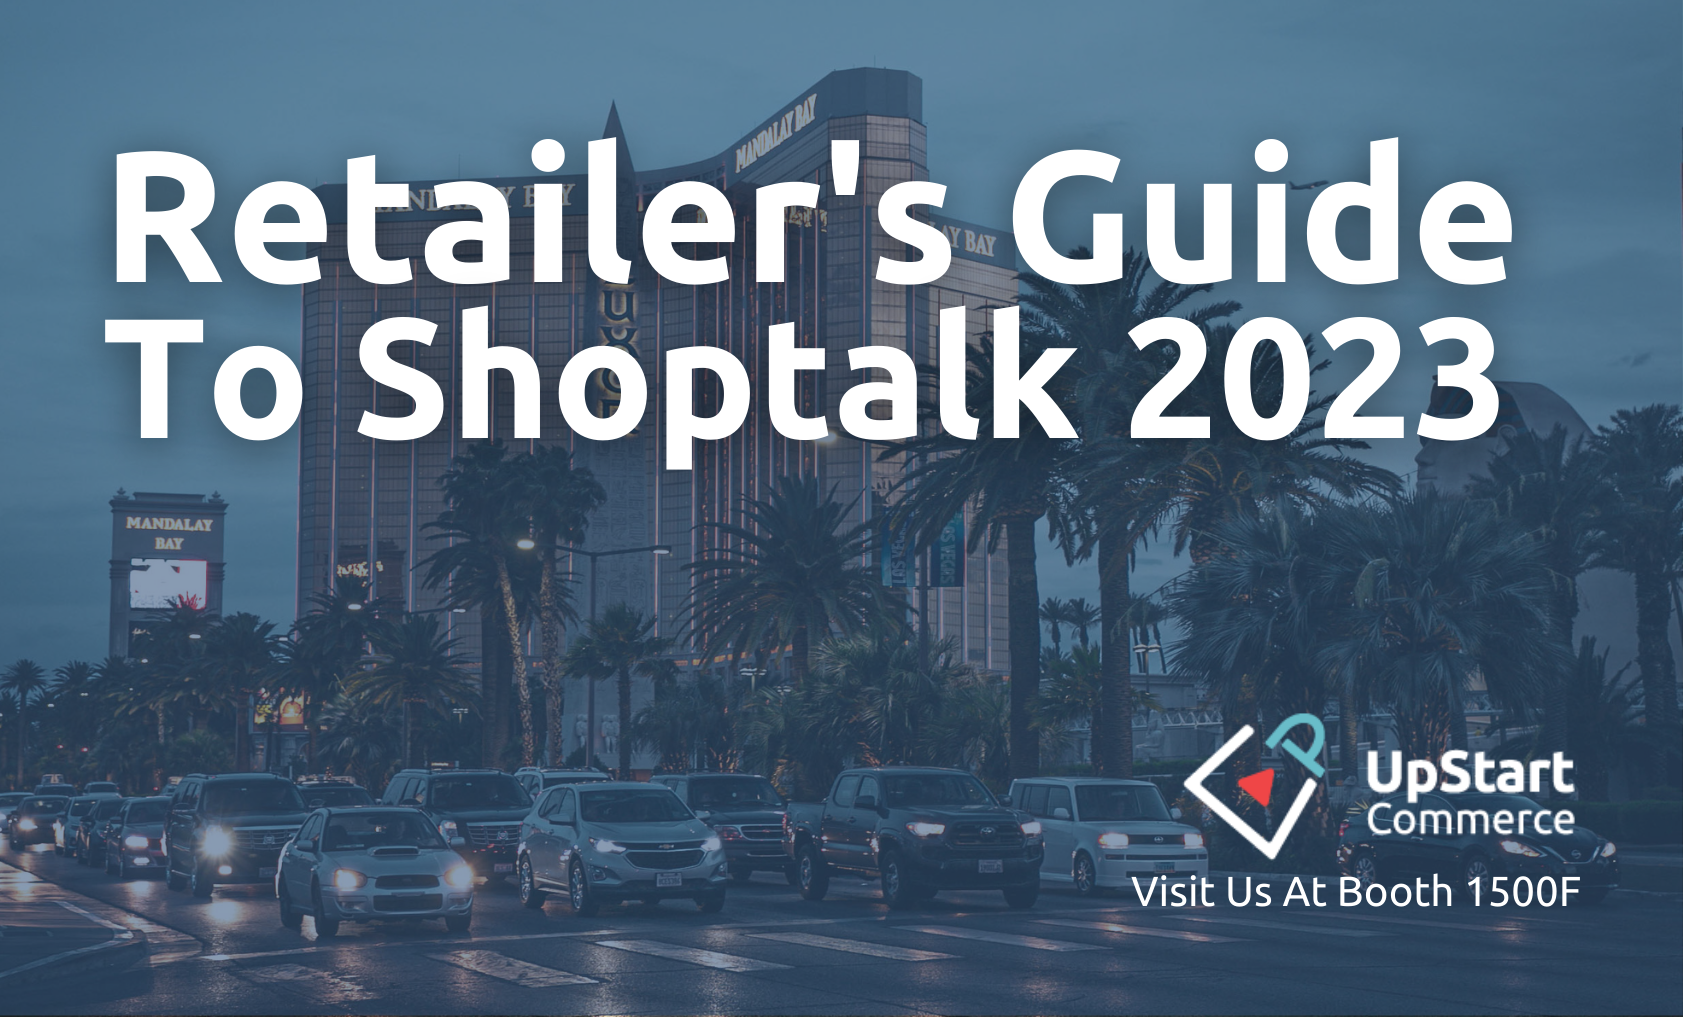 Retailer's Guide To Shoptalk 2023, with image of a busty Vegas street and Mandalay Bay in the distance